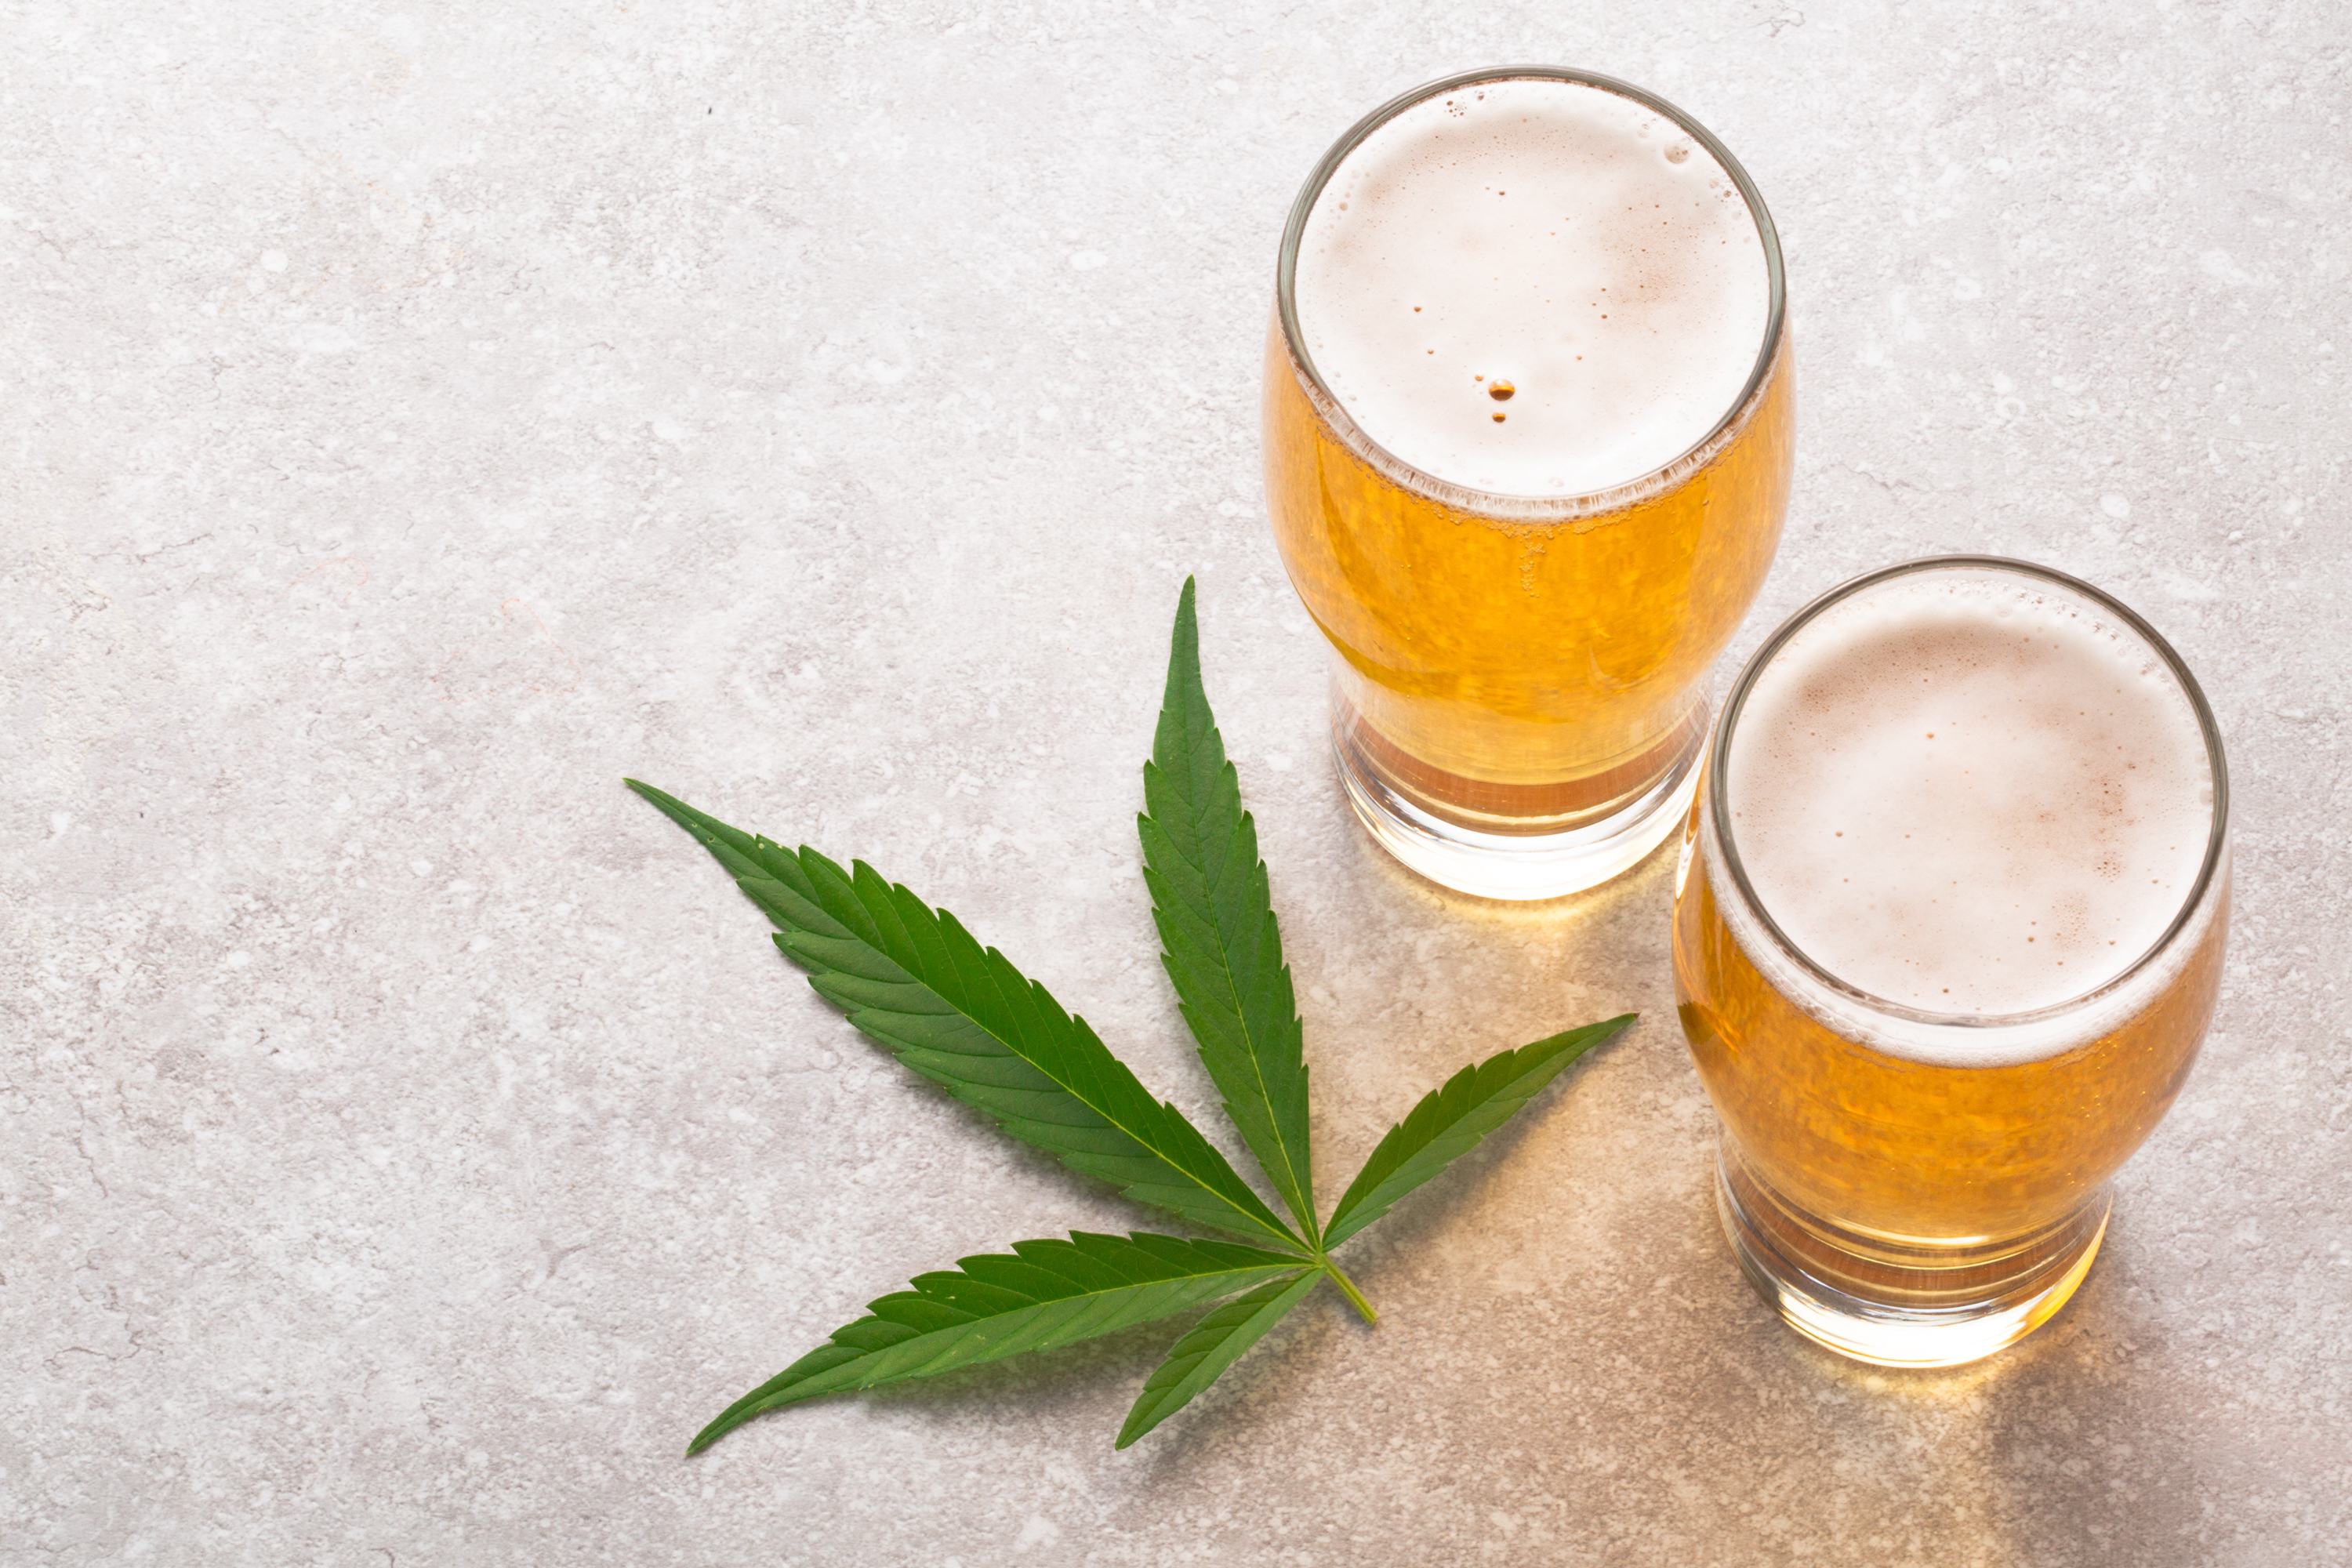 Five Major Beverage Makers that are Serving up Cannabis this Summer